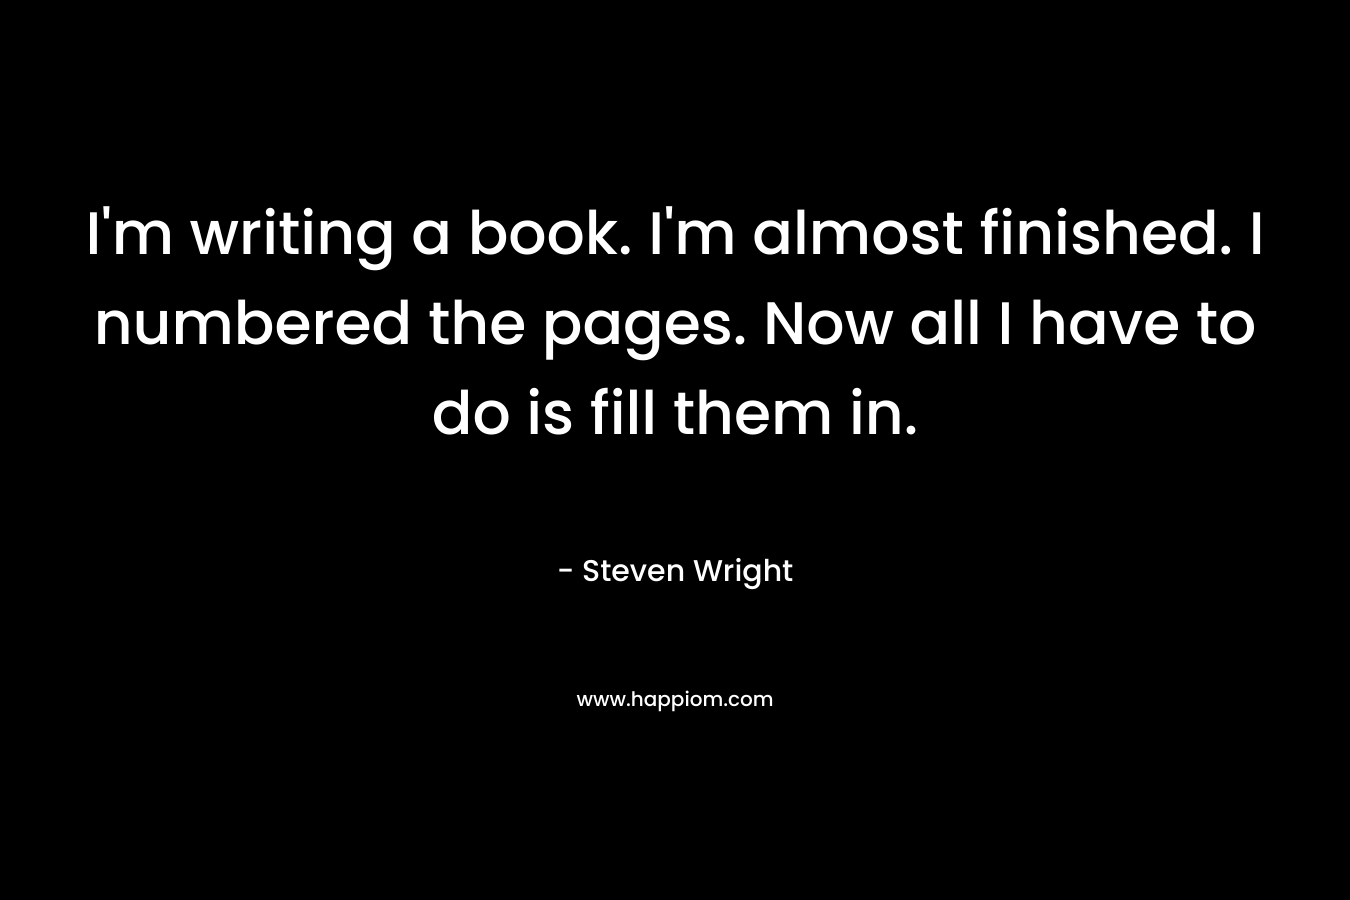 I’m writing a book. I’m almost finished. I numbered the pages. Now all I have to do is fill them in. – Steven Wright